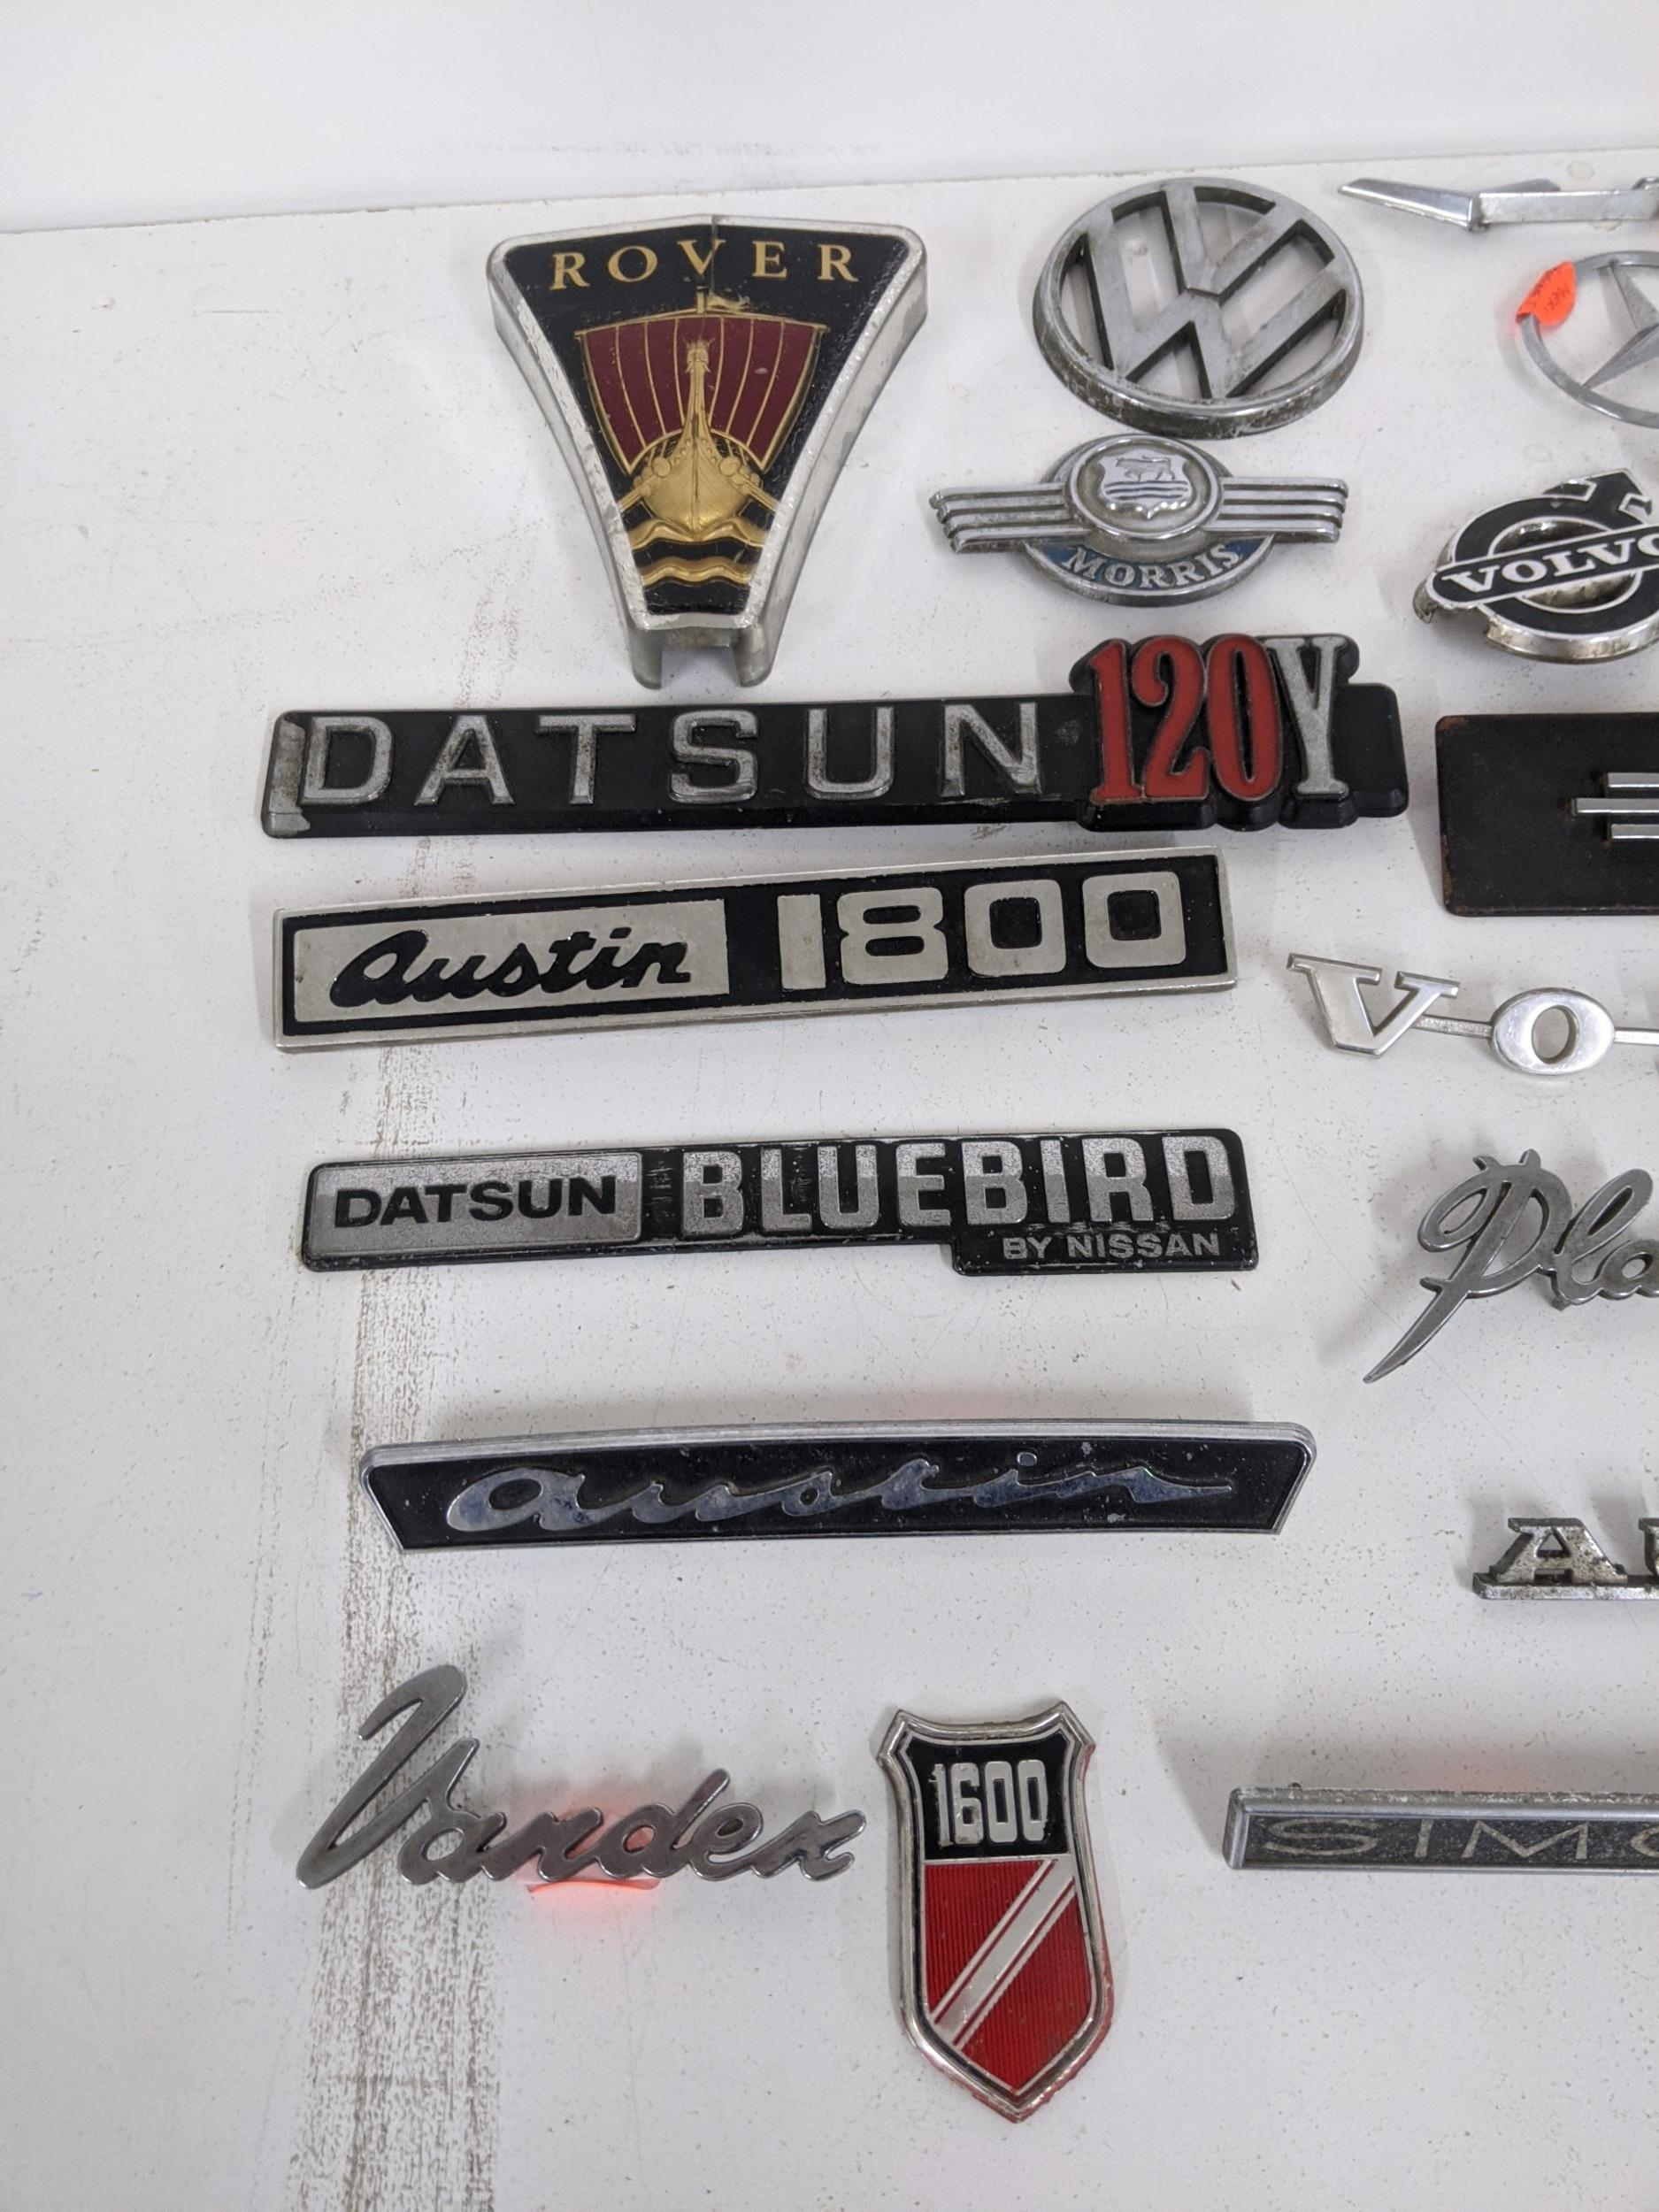 Miscellaneous car make and model badges to include Volvo, Rover, Alfa Romeo, DAF, Austin 1300 - Image 2 of 4